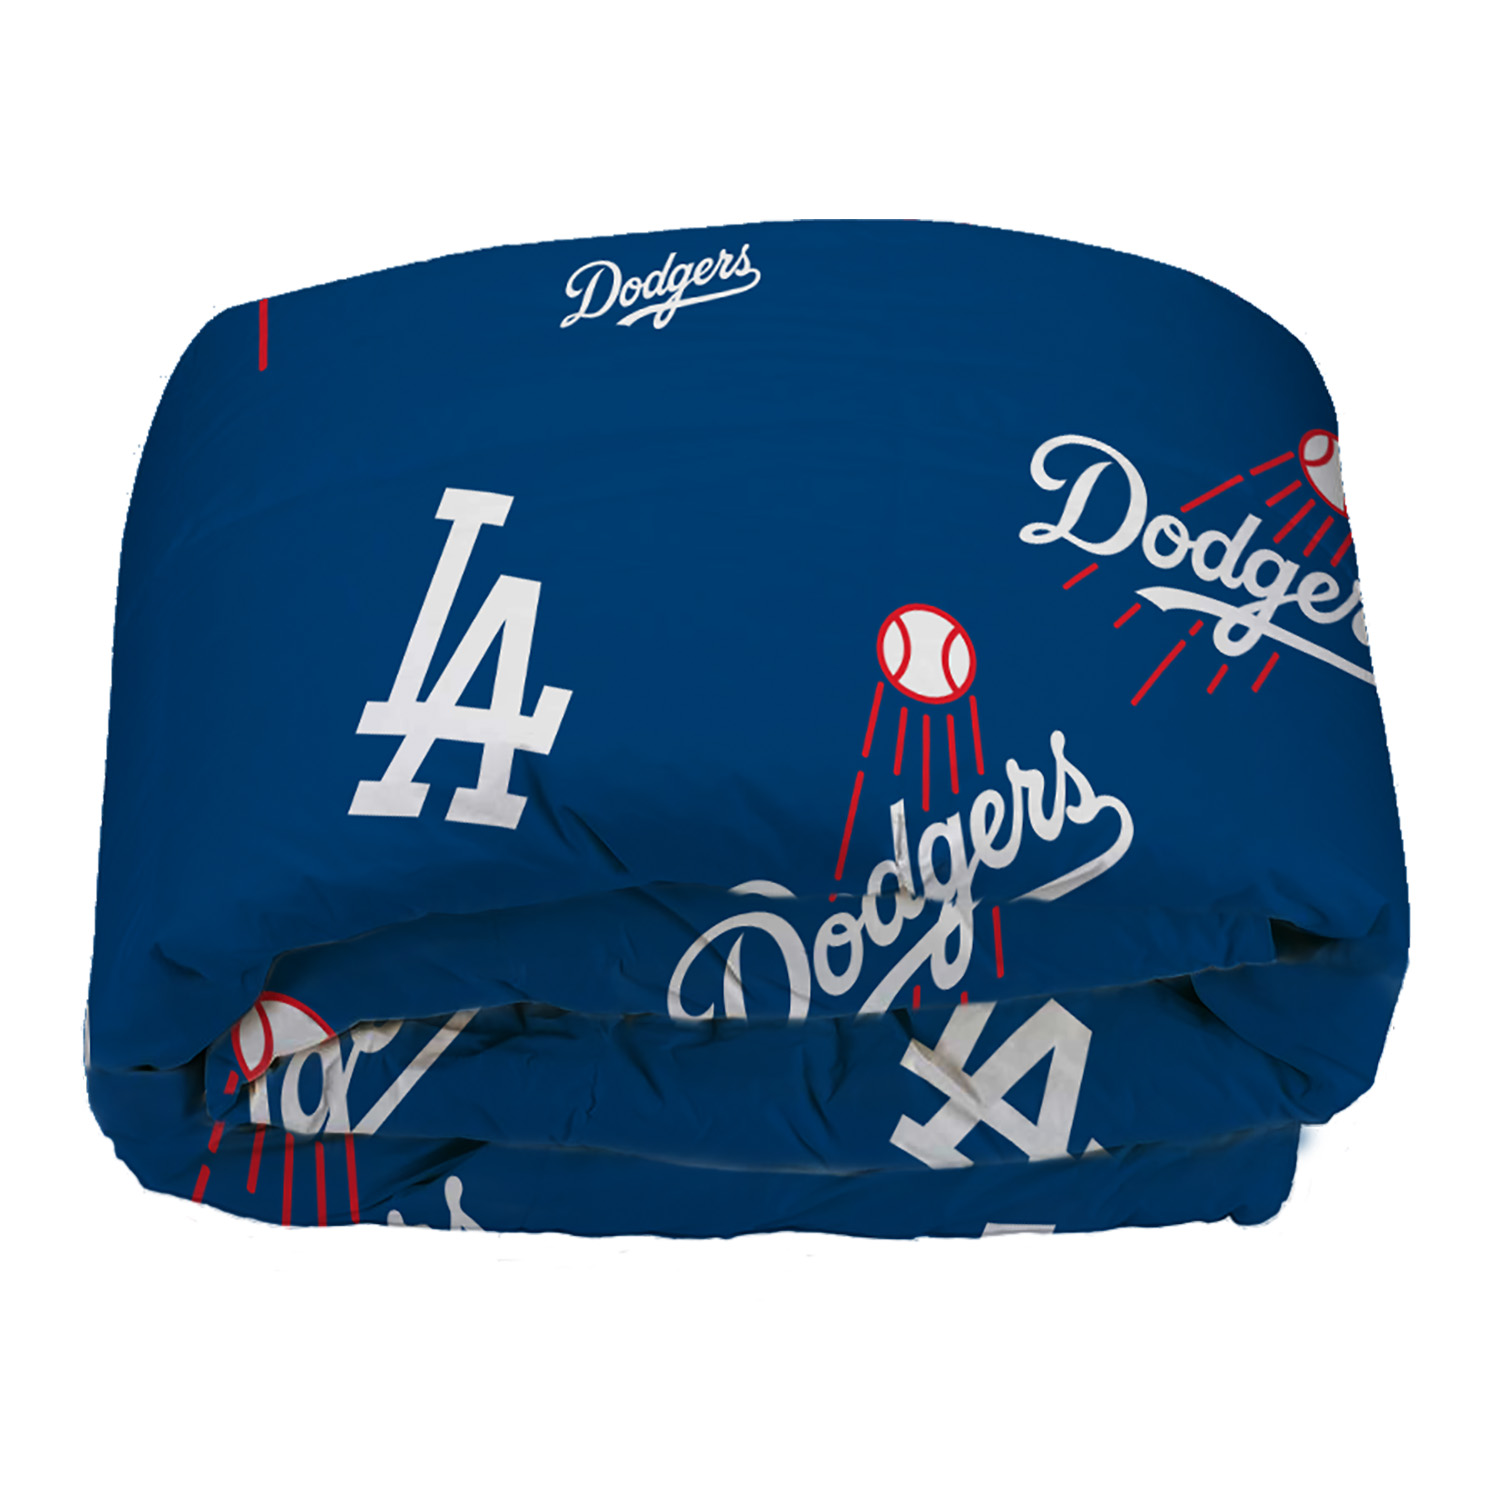 MLB Los Angeles Dodgers Bed In Bag Set, Queen Size, Team Colors, 100% Polyester, 5 Piece Set - image 2 of 4